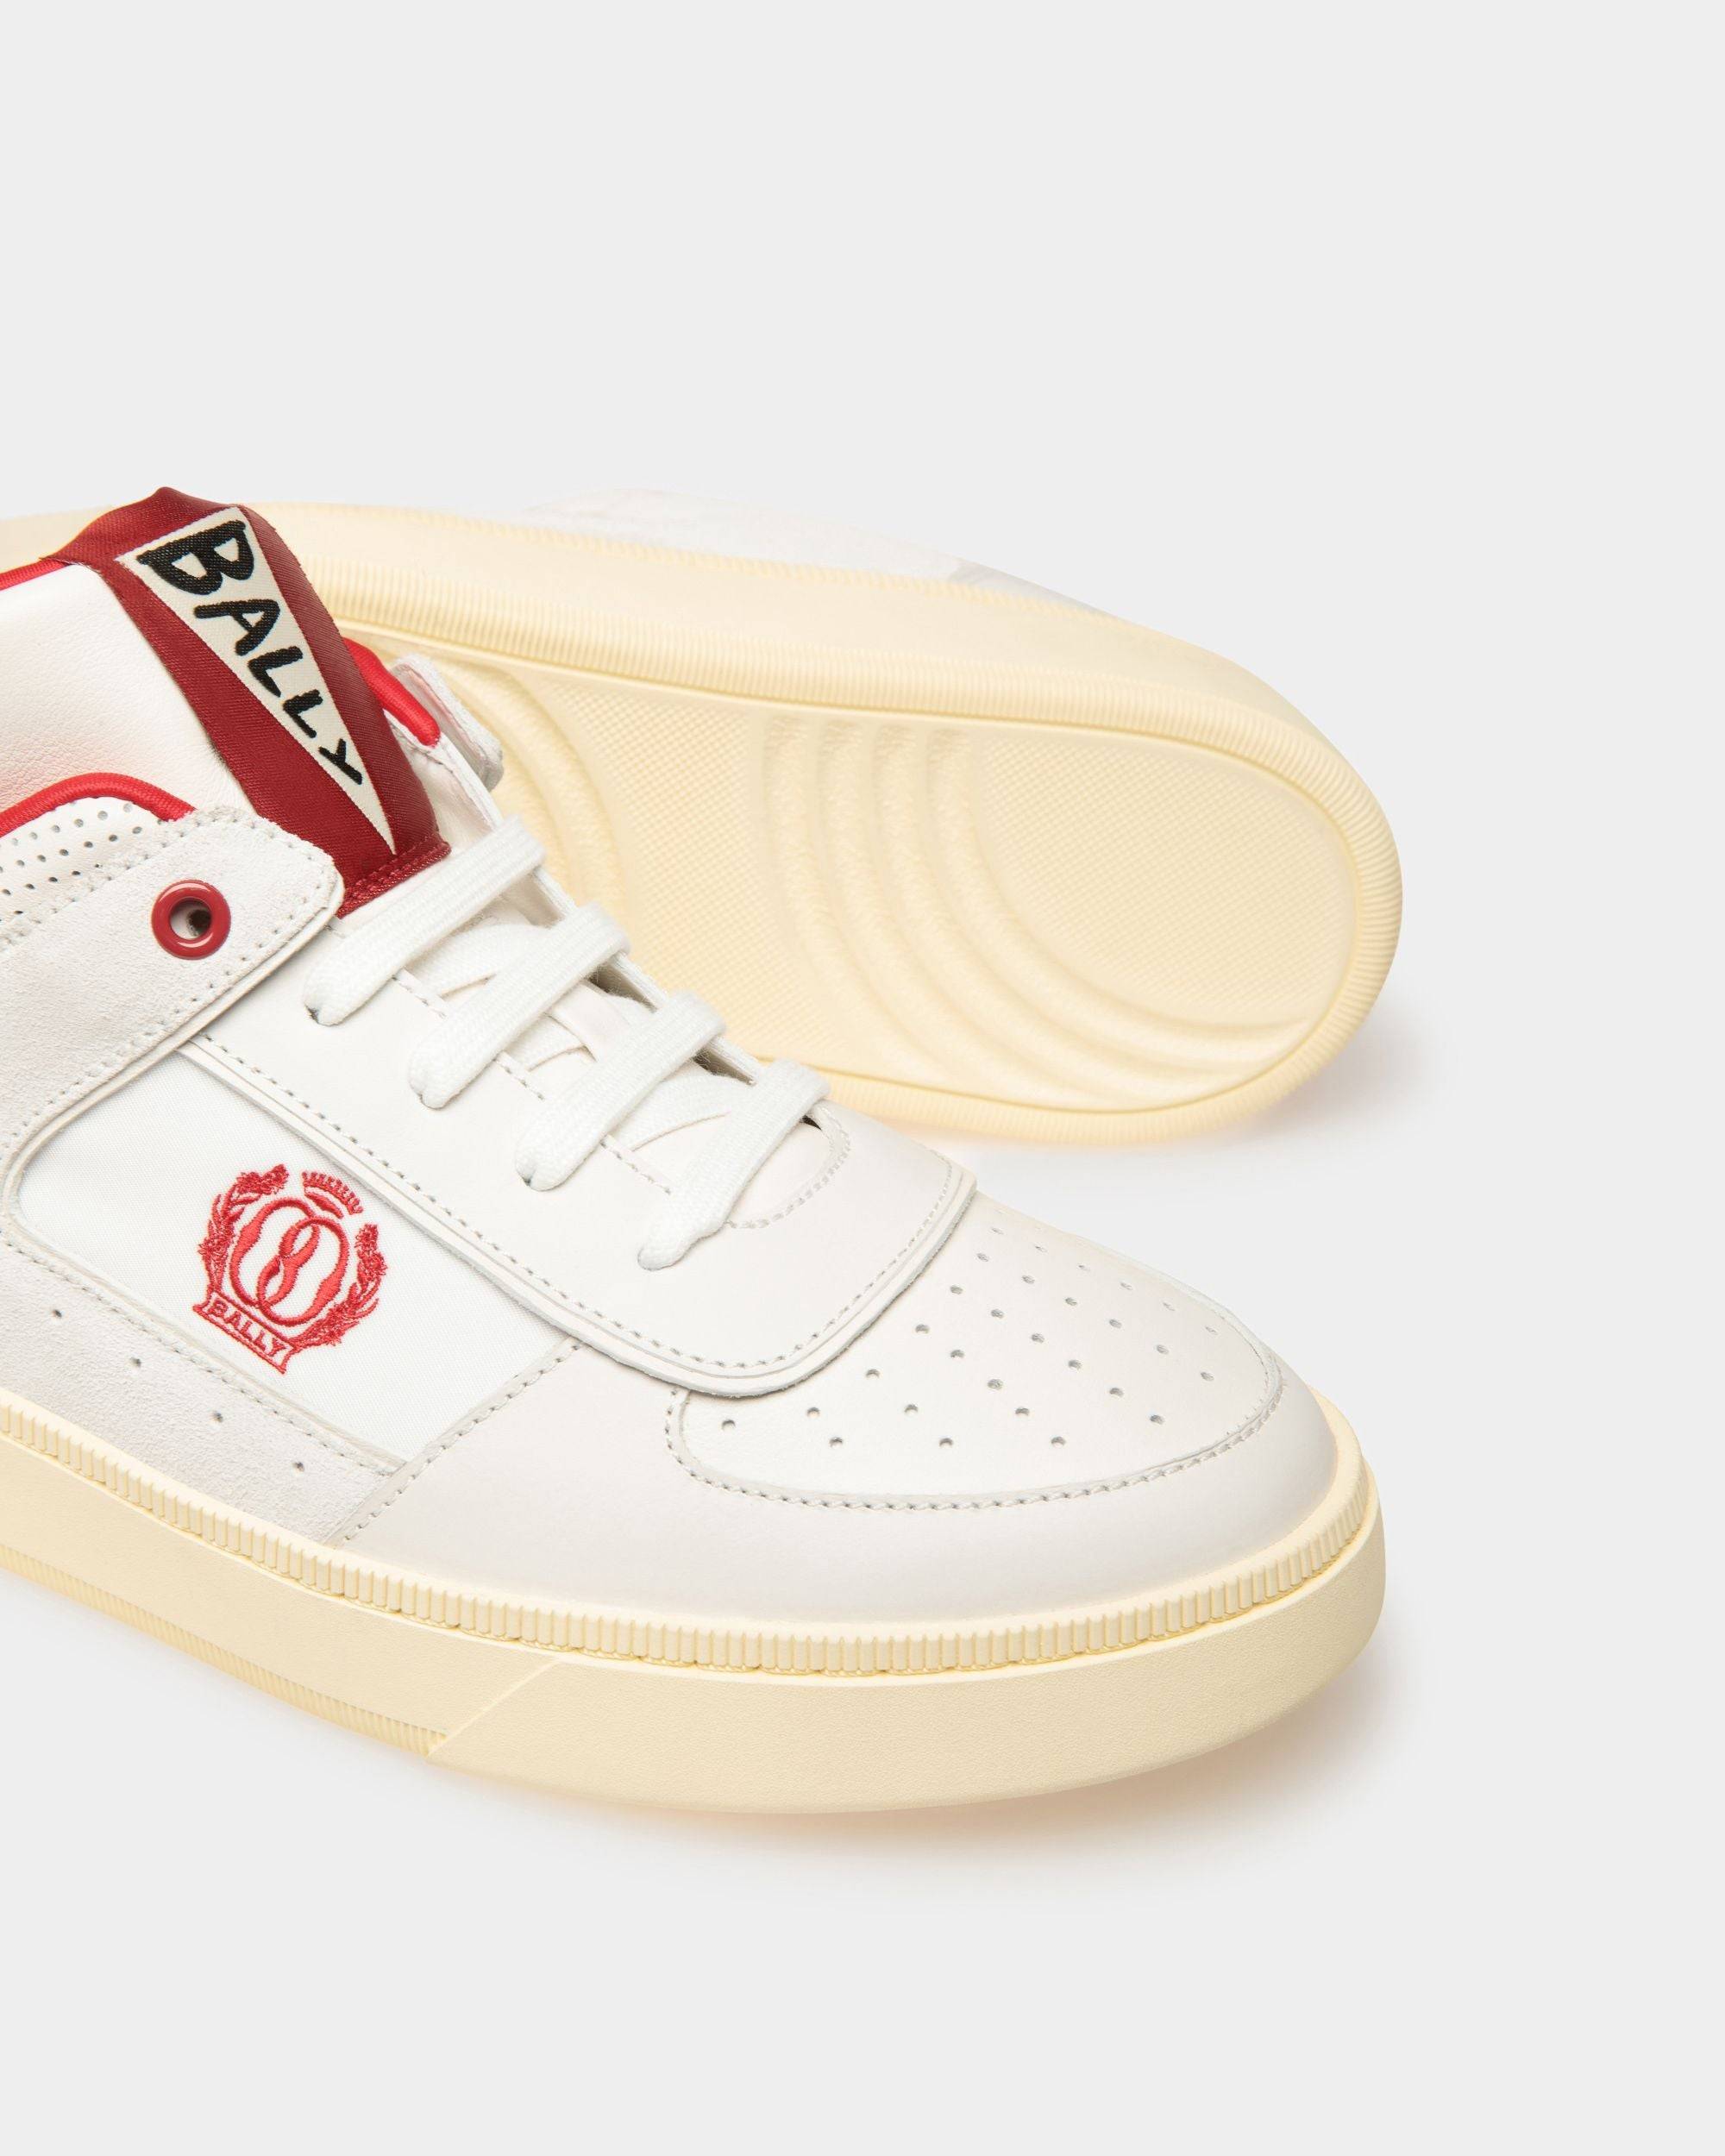 Riweira | Women's Sneakers | White And Red Leather | Bally | Still Life Below